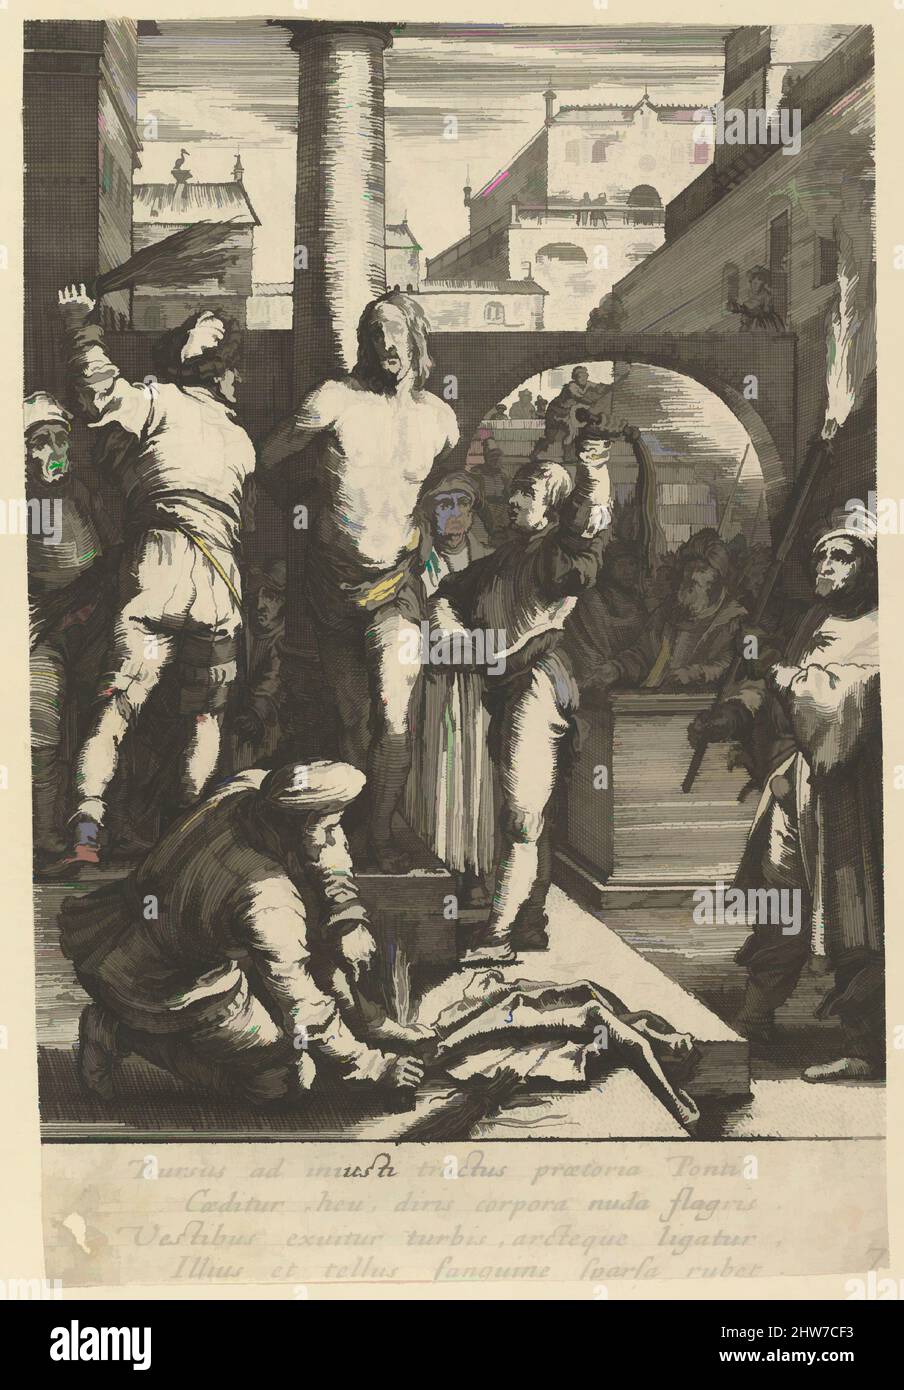 Art inspired by The Flagellation of Christ, from The Passion of Christ, mid 17th century, Etching, Sheet: 5 3/4 x 3 7/8 in. (14.6 x 9.8 cm), Prints, Nicolas Cochin (French, Troyes 1610–1686 Paris), After Hendrick Goltzius (Netherlandish, Mühlbracht 1558–1617 Haarlem, Classic works modernized by Artotop with a splash of modernity. Shapes, color and value, eye-catching visual impact on art. Emotions through freedom of artworks in a contemporary way. A timeless message pursuing a wildly creative new direction. Artists turning to the digital medium and creating the Artotop NFT Stock Photo